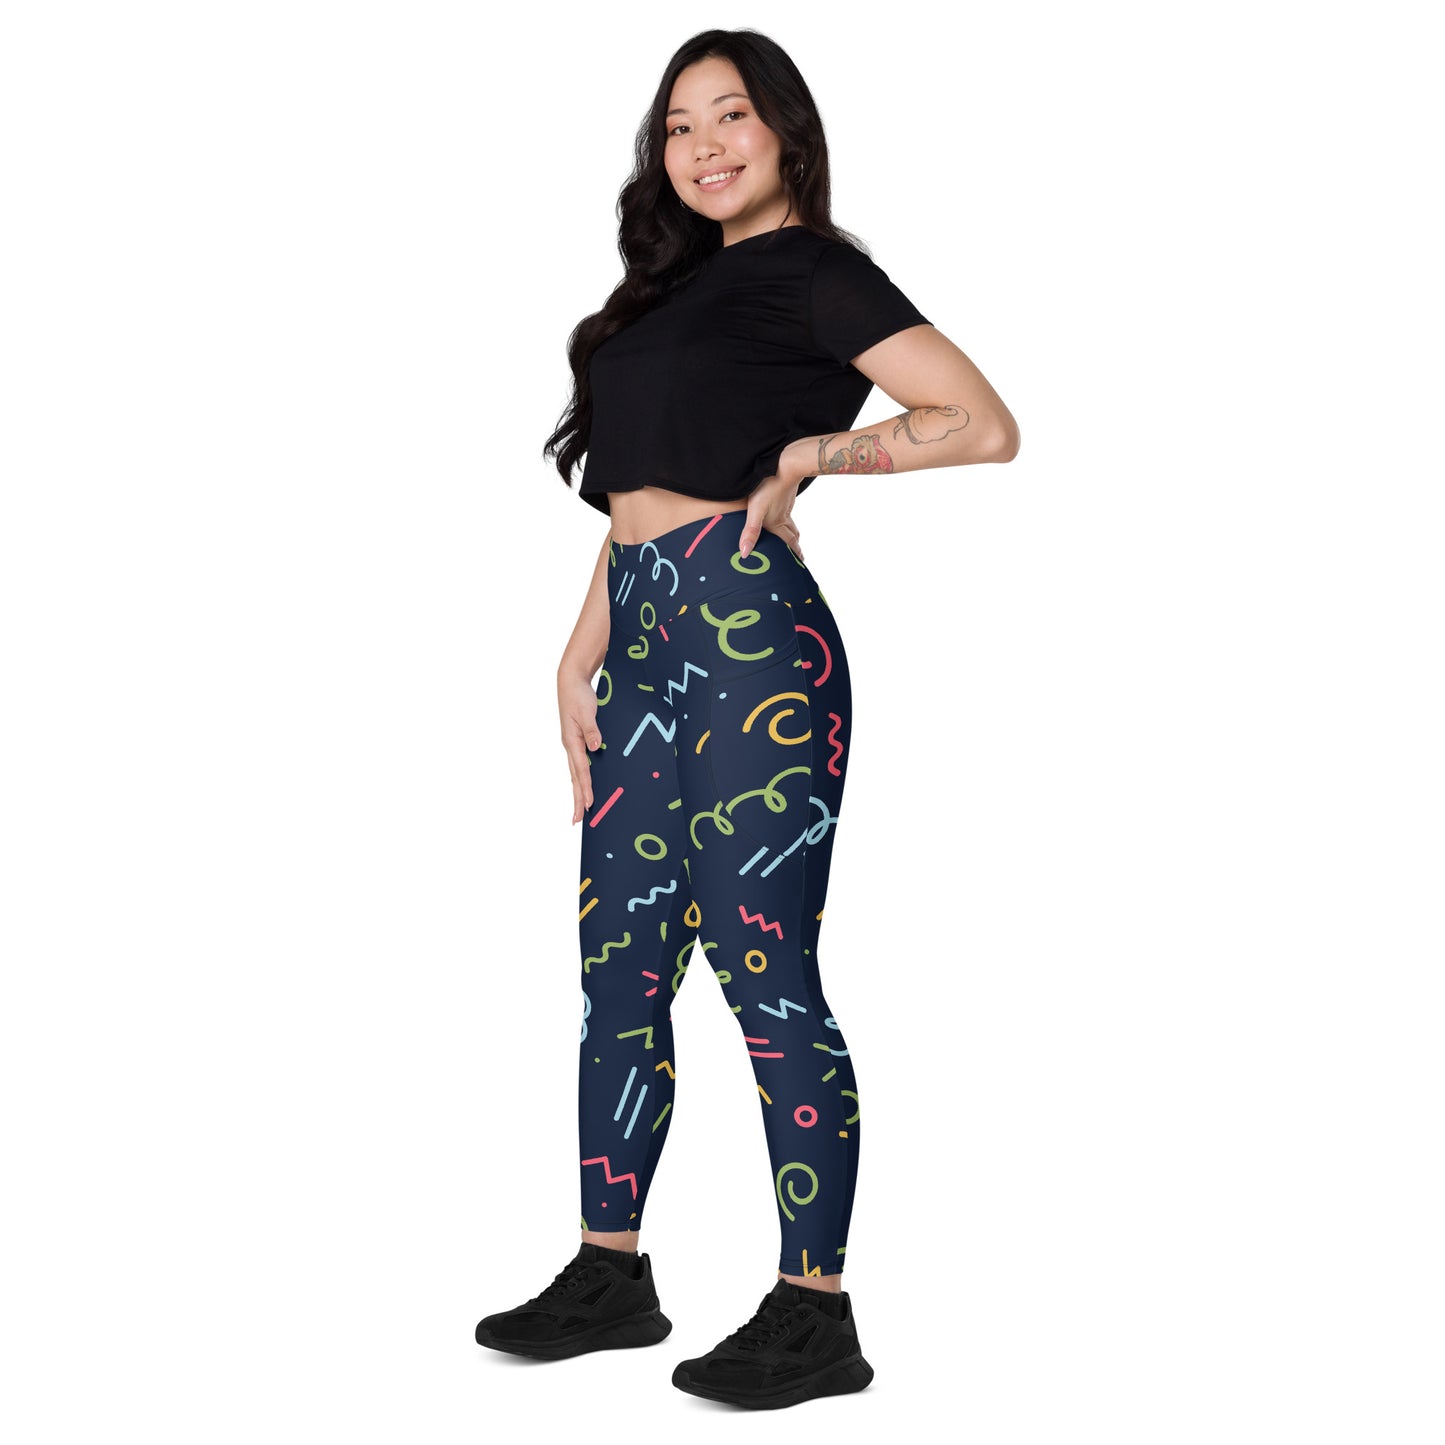 Squiggles - Leggings with pockets, 2XS - 6XL Leggings With Pockets 2XS - 6XL (US)